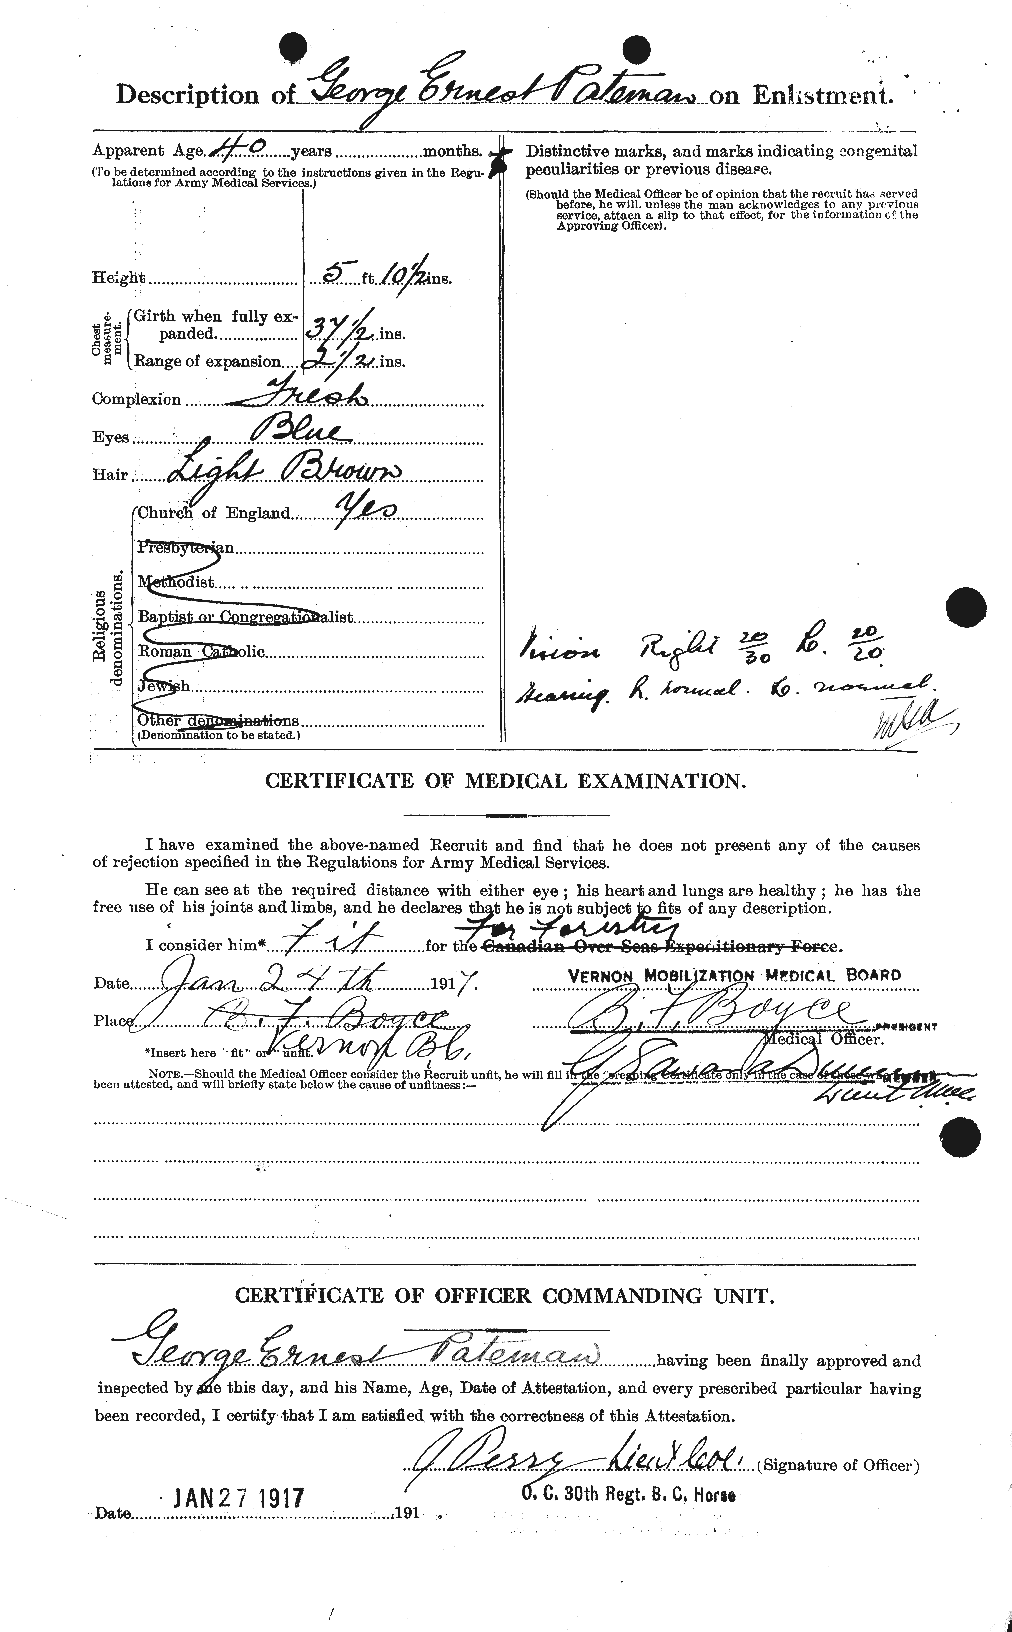 Personnel Records of the First World War - CEF 567447b